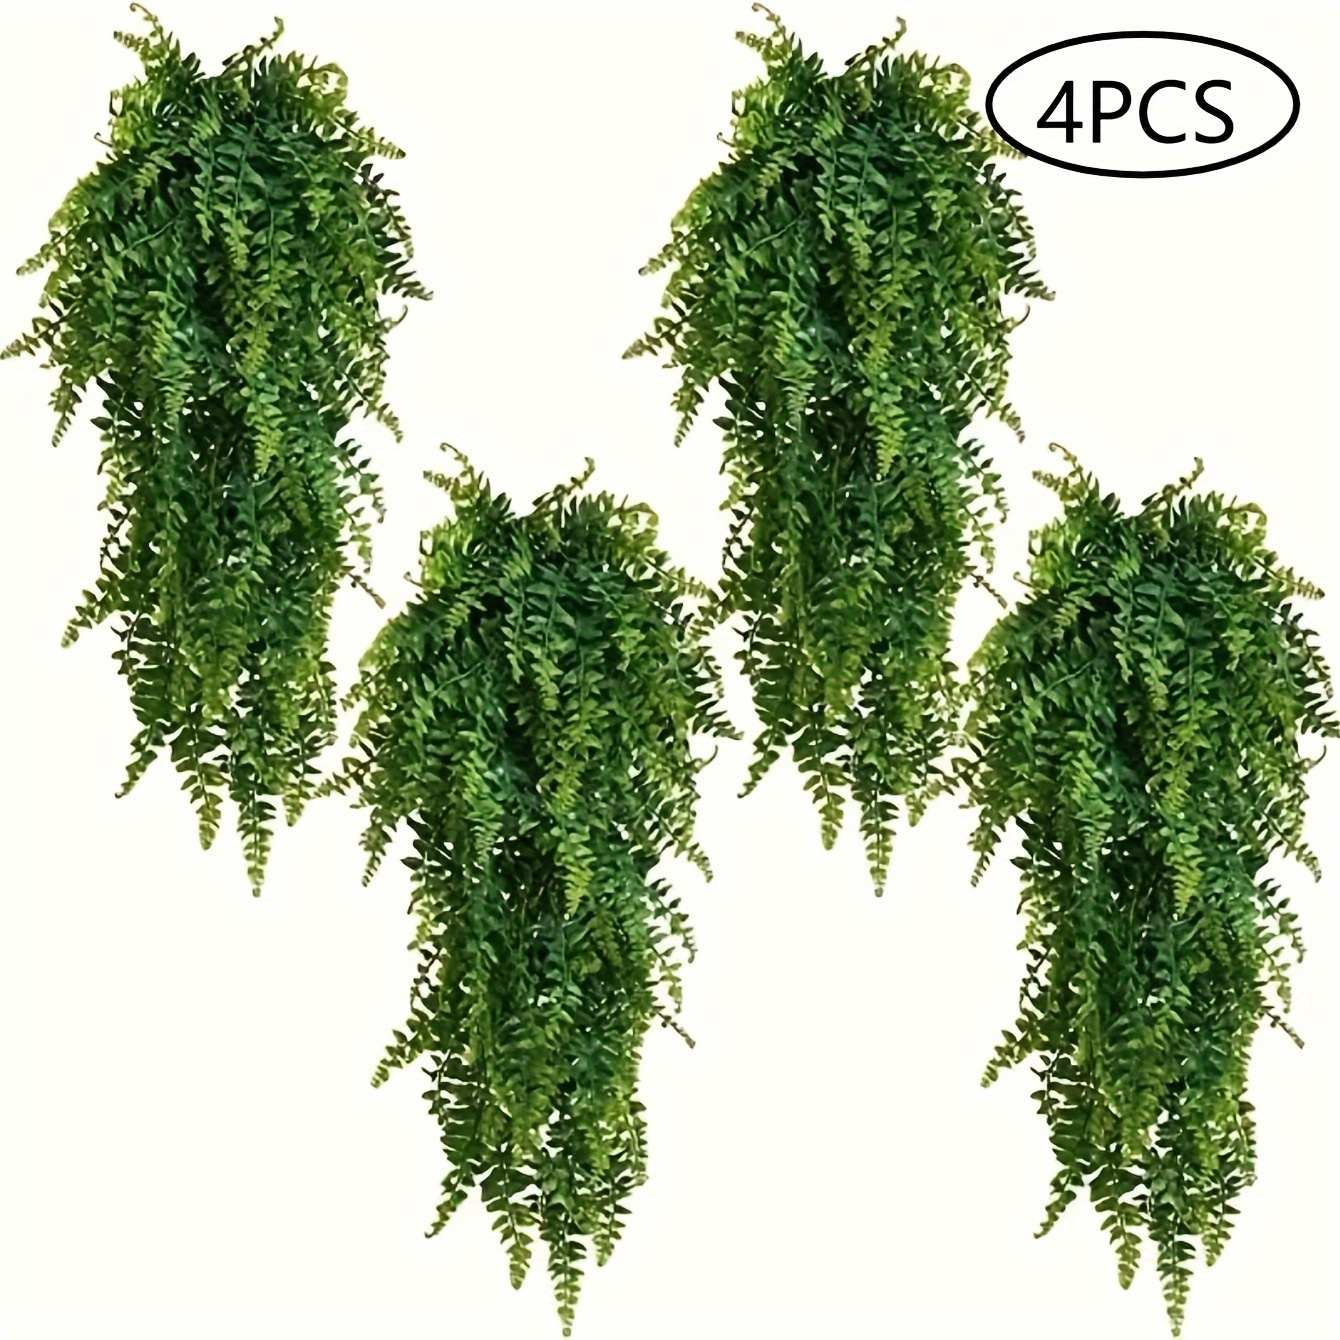 

4pcs, Faux Hanging Plant, Fake Plants Fake Fern Wall Artificial, Ivy Faux Greenery Plants For Patio Porch Indoor Outdoor Uv Resistant Plastic Plants Decor